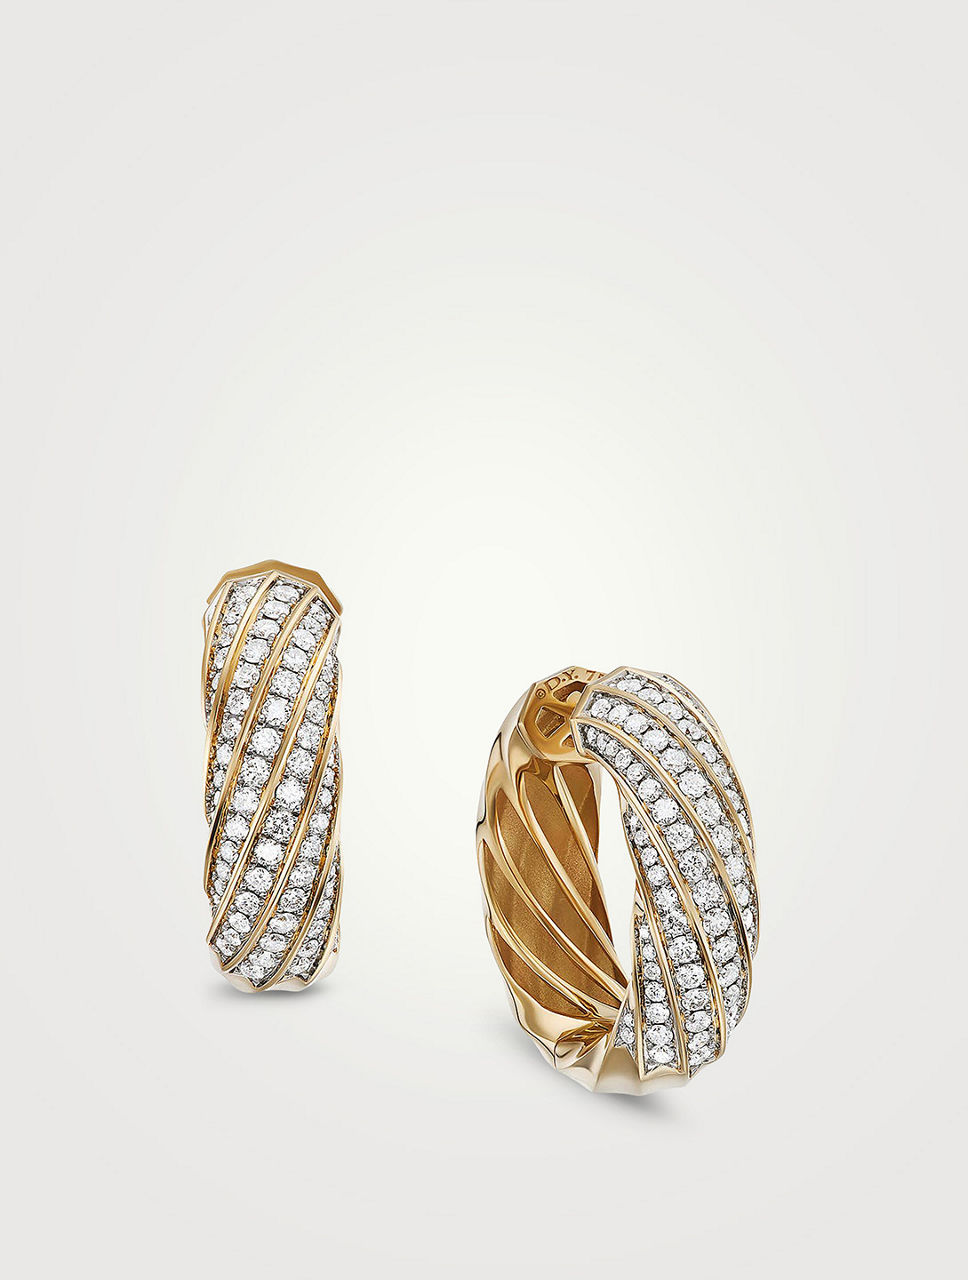 Cable Edge® Hoop Earrings In 18k Yellow Gold With Pavé Diamonds